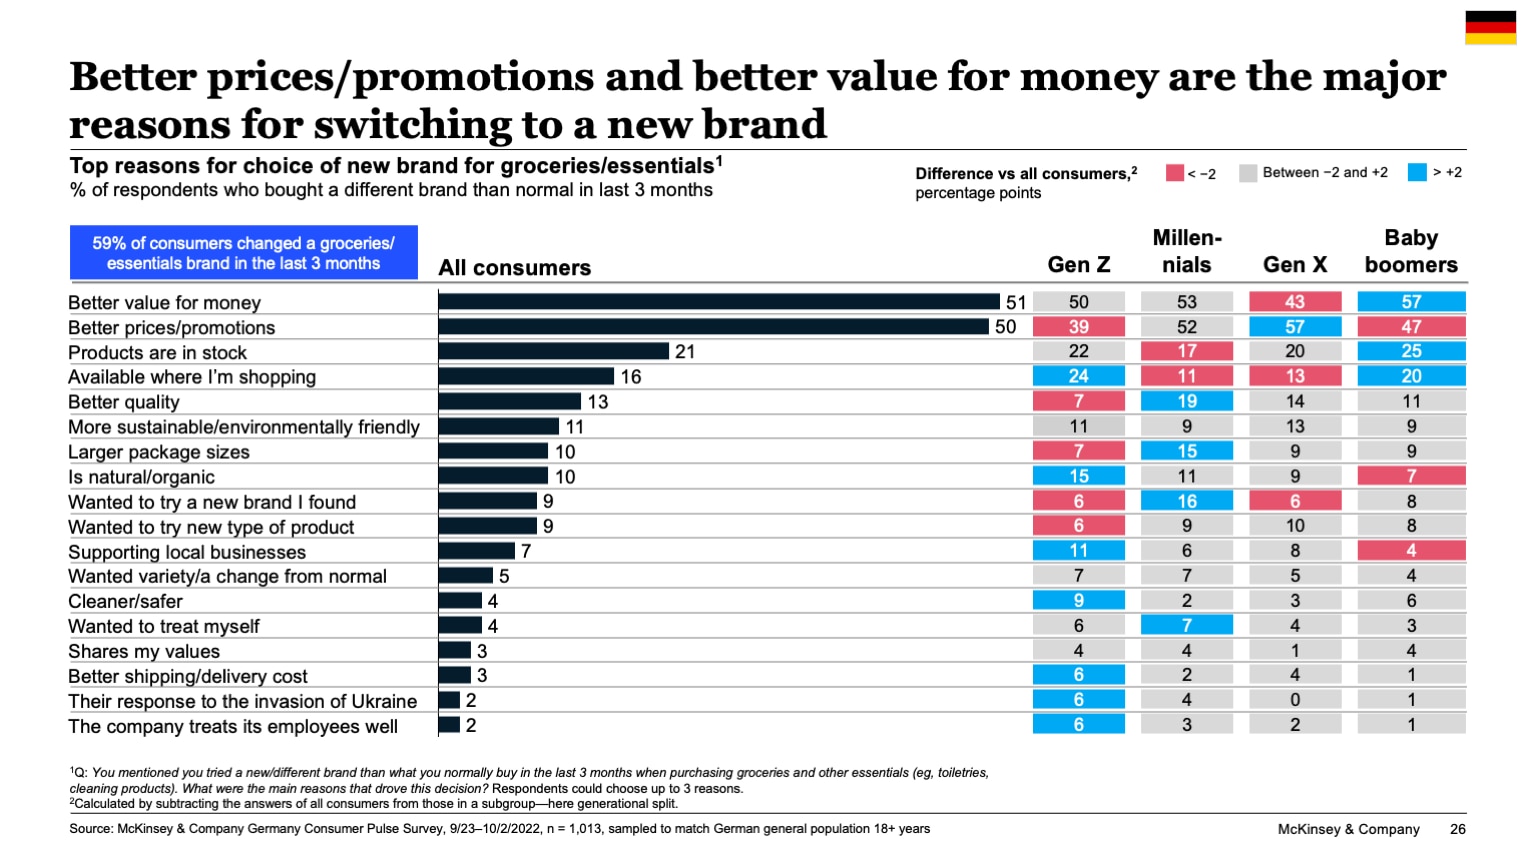 Better prices/promotions and better value for money are the major reasons for switching to a new brand